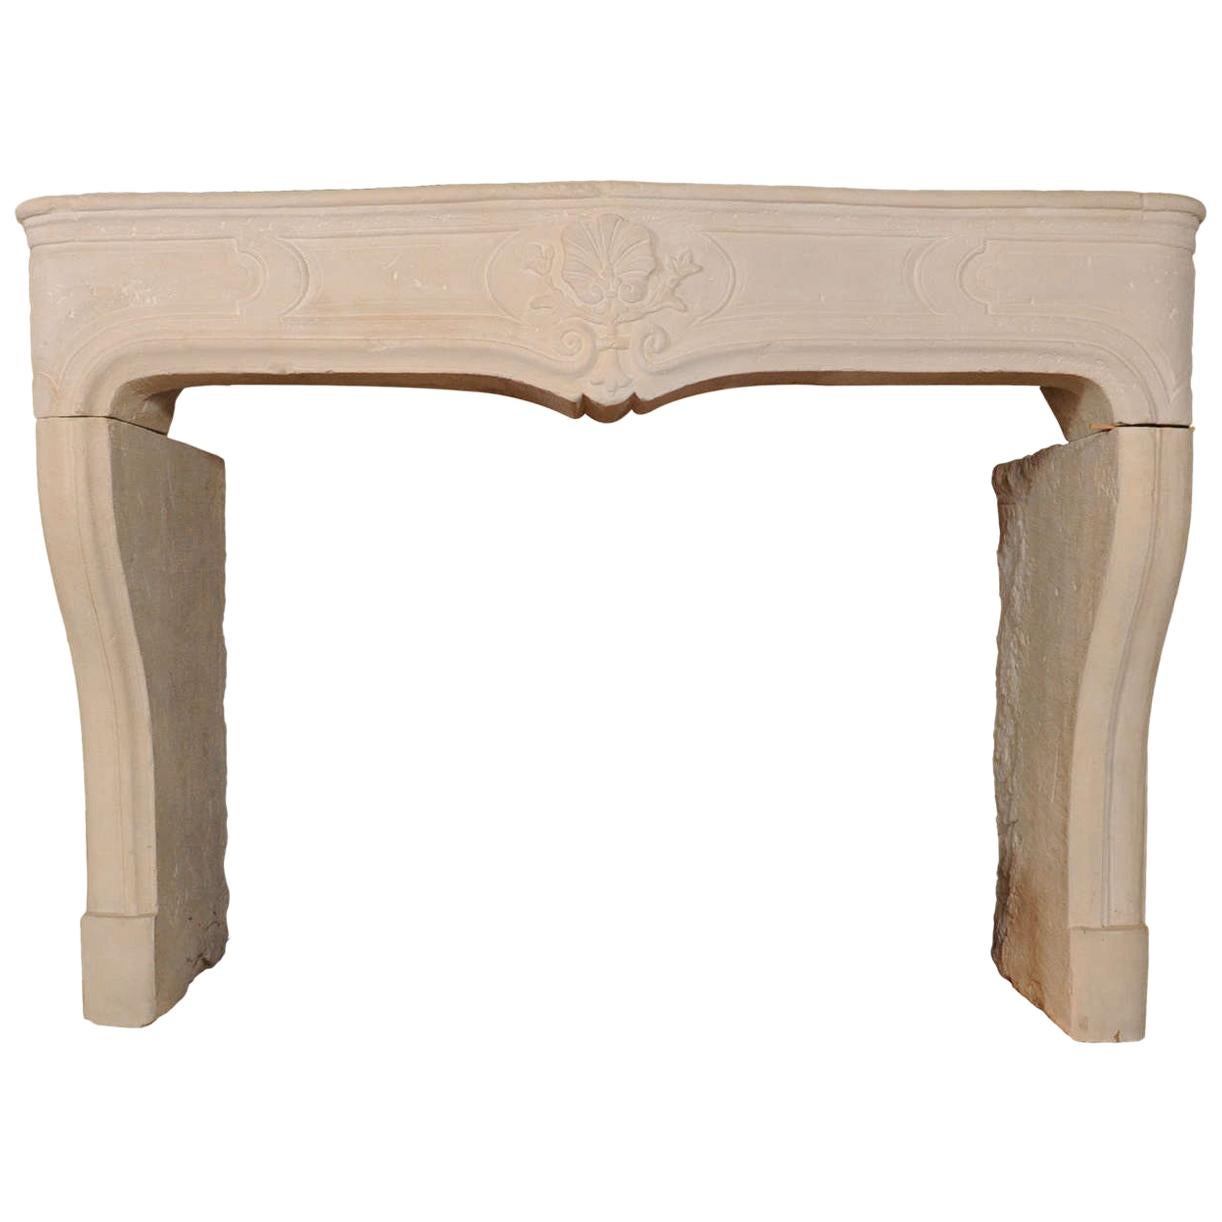 Antique Early 18th Century French Baroque Limestone Fireplace / Mantel Piece For Sale